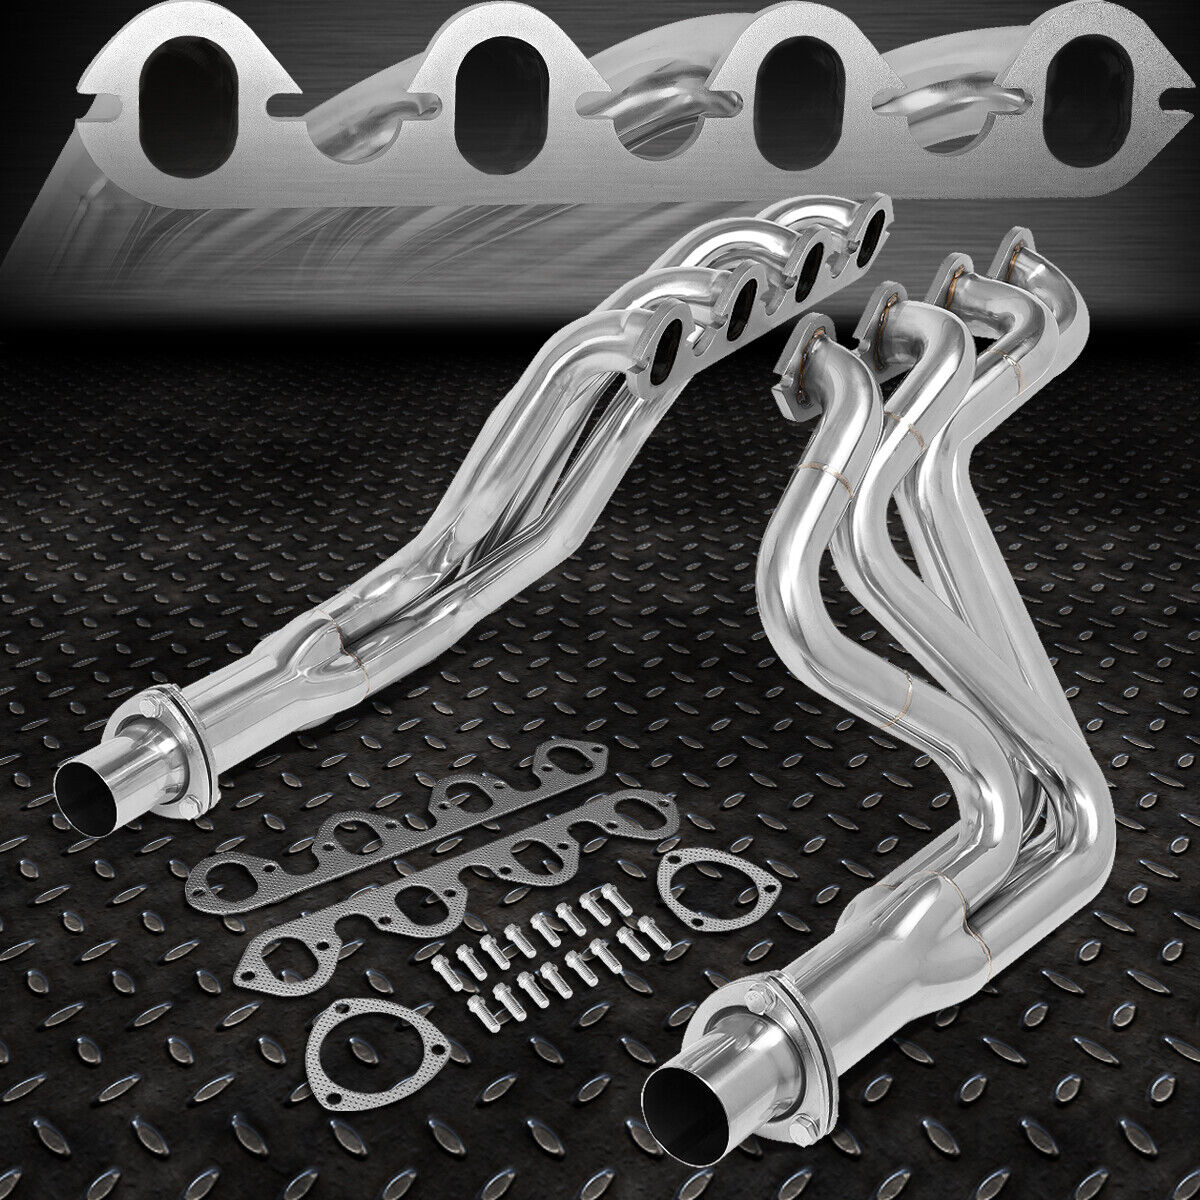 FOR 83-87 FORD F250 F350 7.5L V8 PAIR STAINLESS STEEL MANIFOLD EXHAUST HEADERS